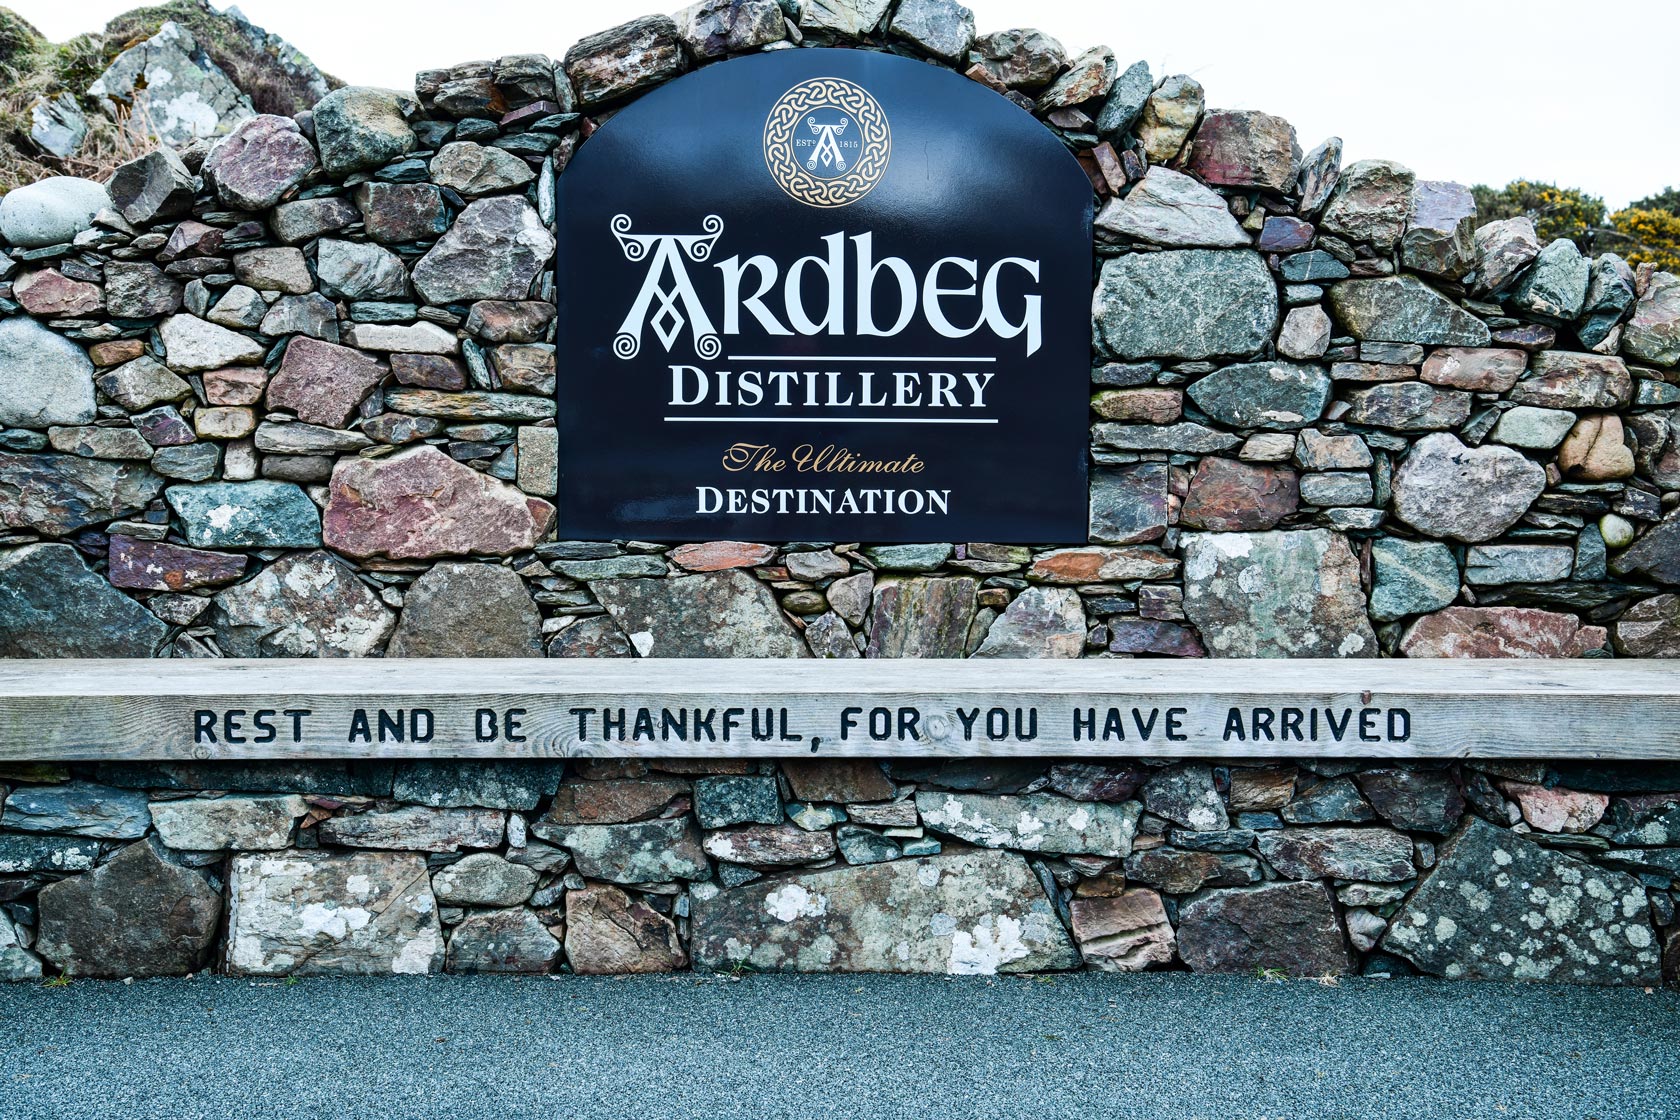 The Entrance view of the Ardbeg Distillery near Port Ellen on the isle of Islay off the west coast of Scotland.